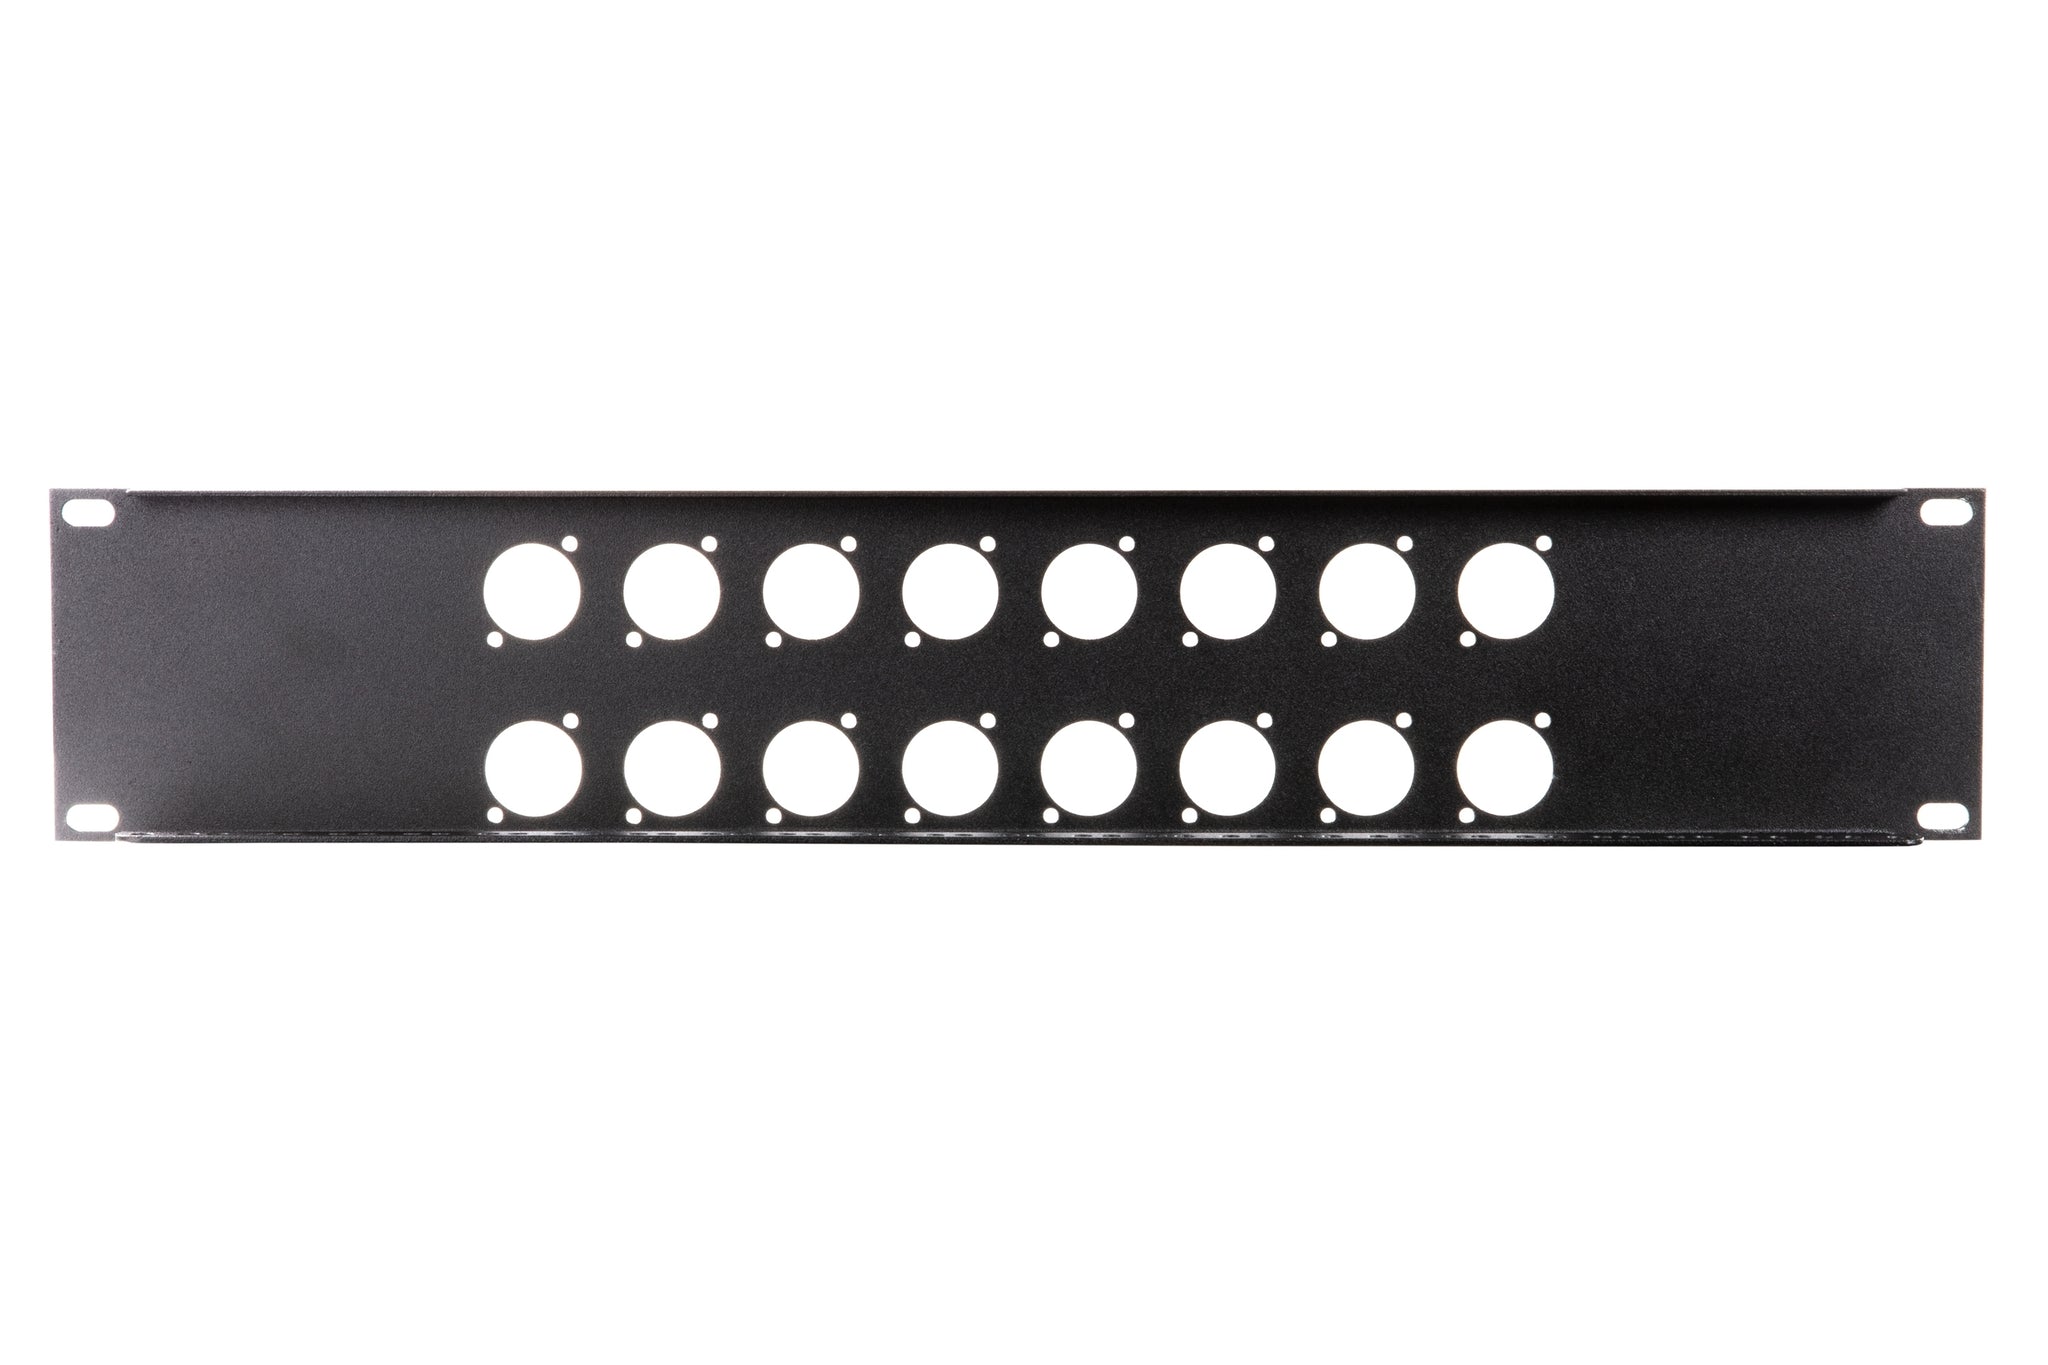 Elite Core TSP-2U-16D 2 Space Rack Panel - 16 D Punches and Tie Down